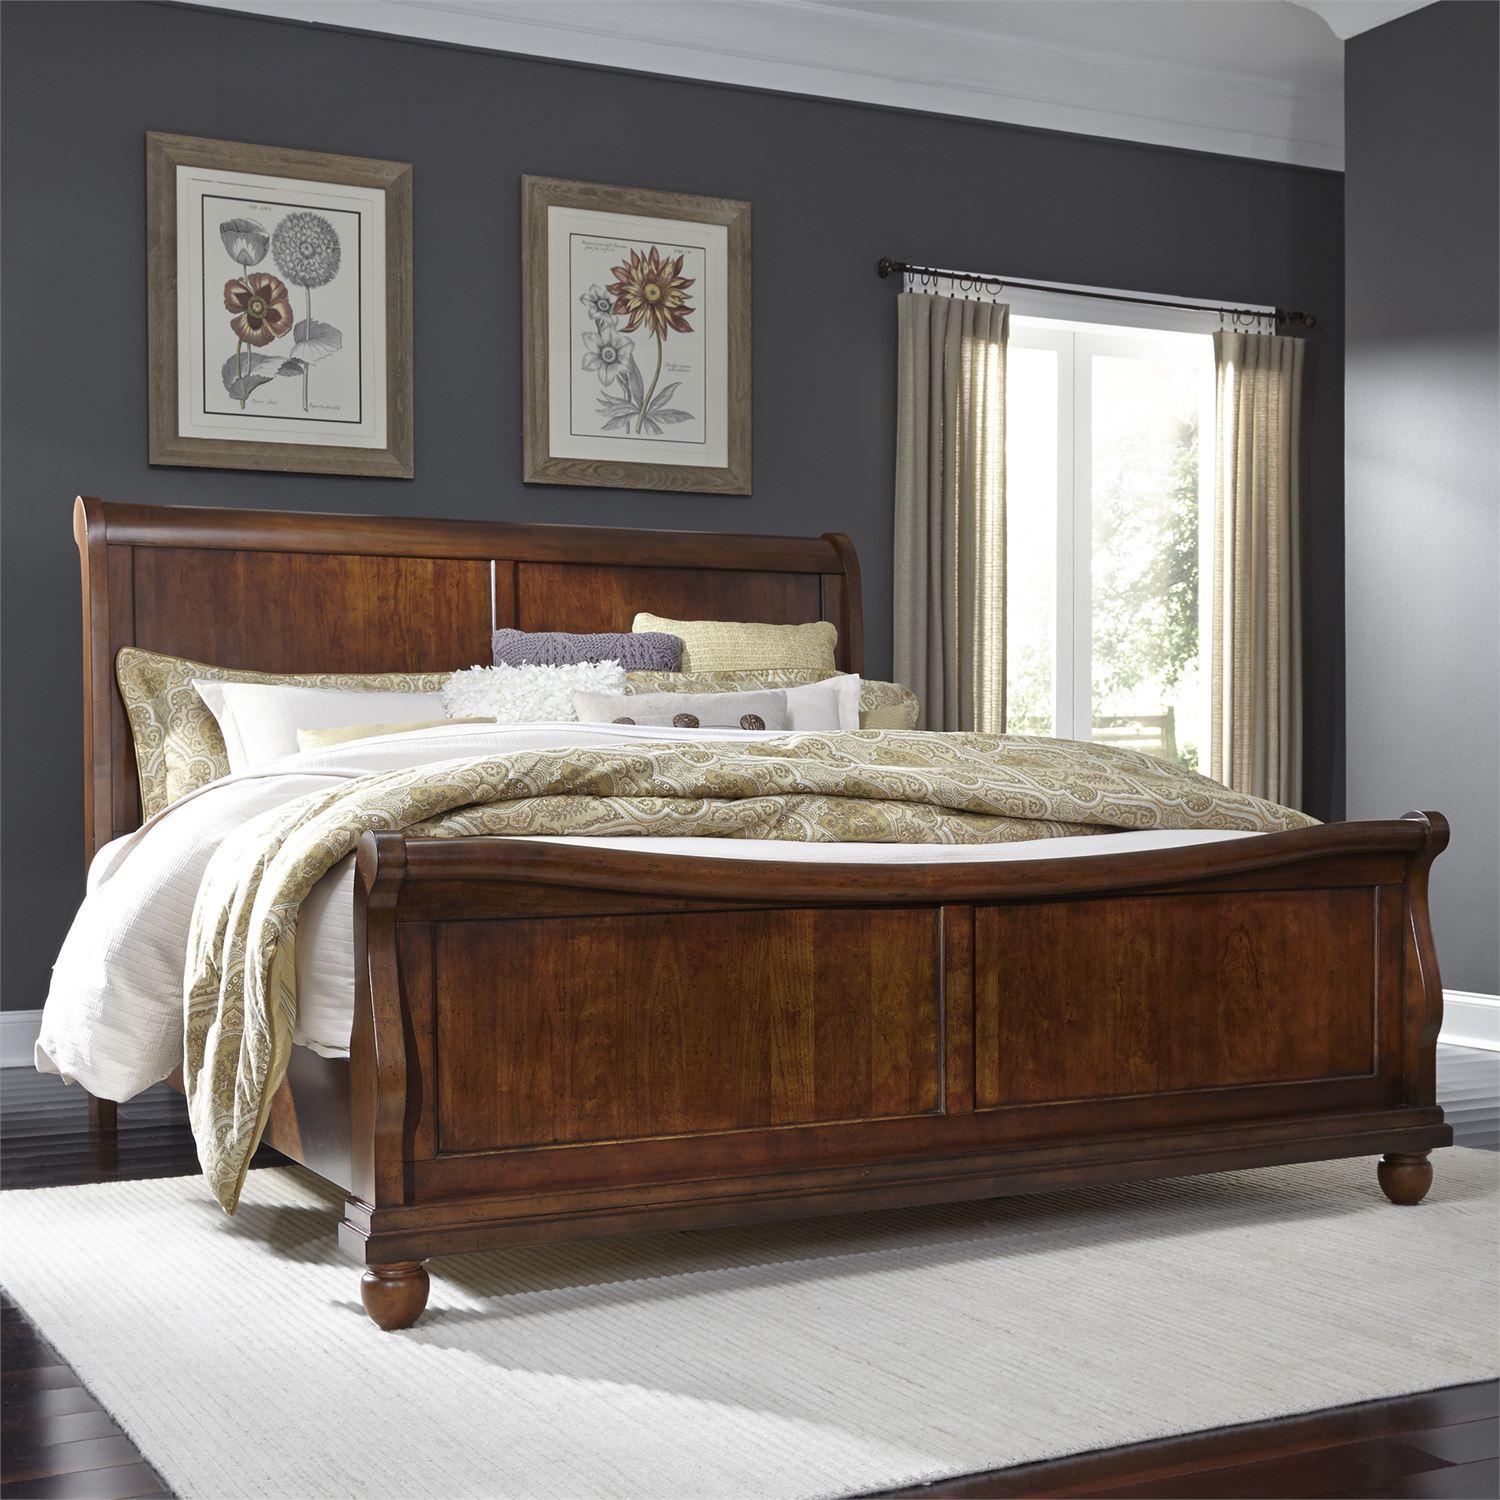 Traditional Sleigh Bed Rustic Traditions  (589-BR) Sleigh Bed 589-BR-KSL in Brown 